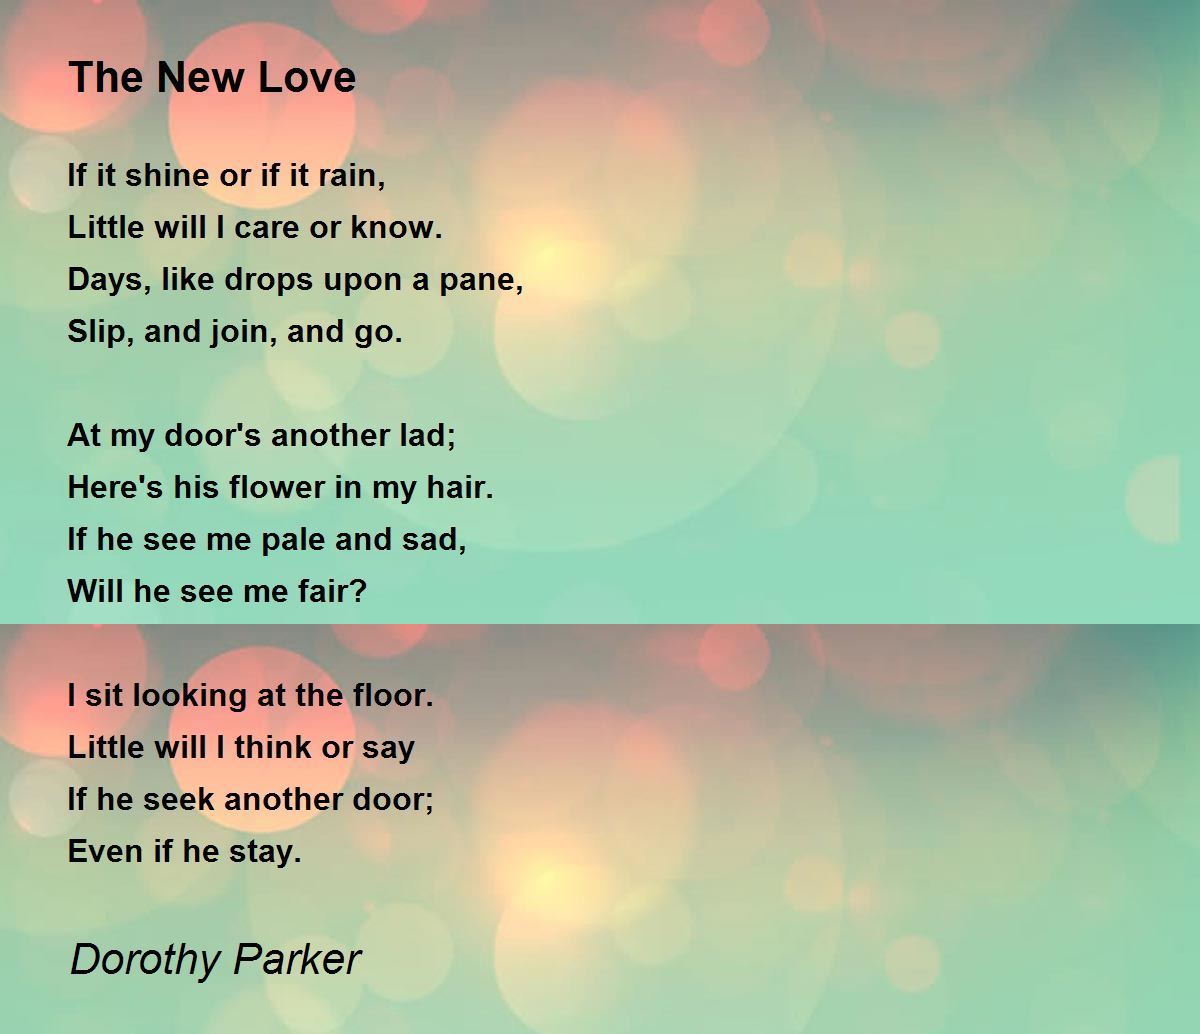 The New Love - The New Love Poem by Dorothy Parker